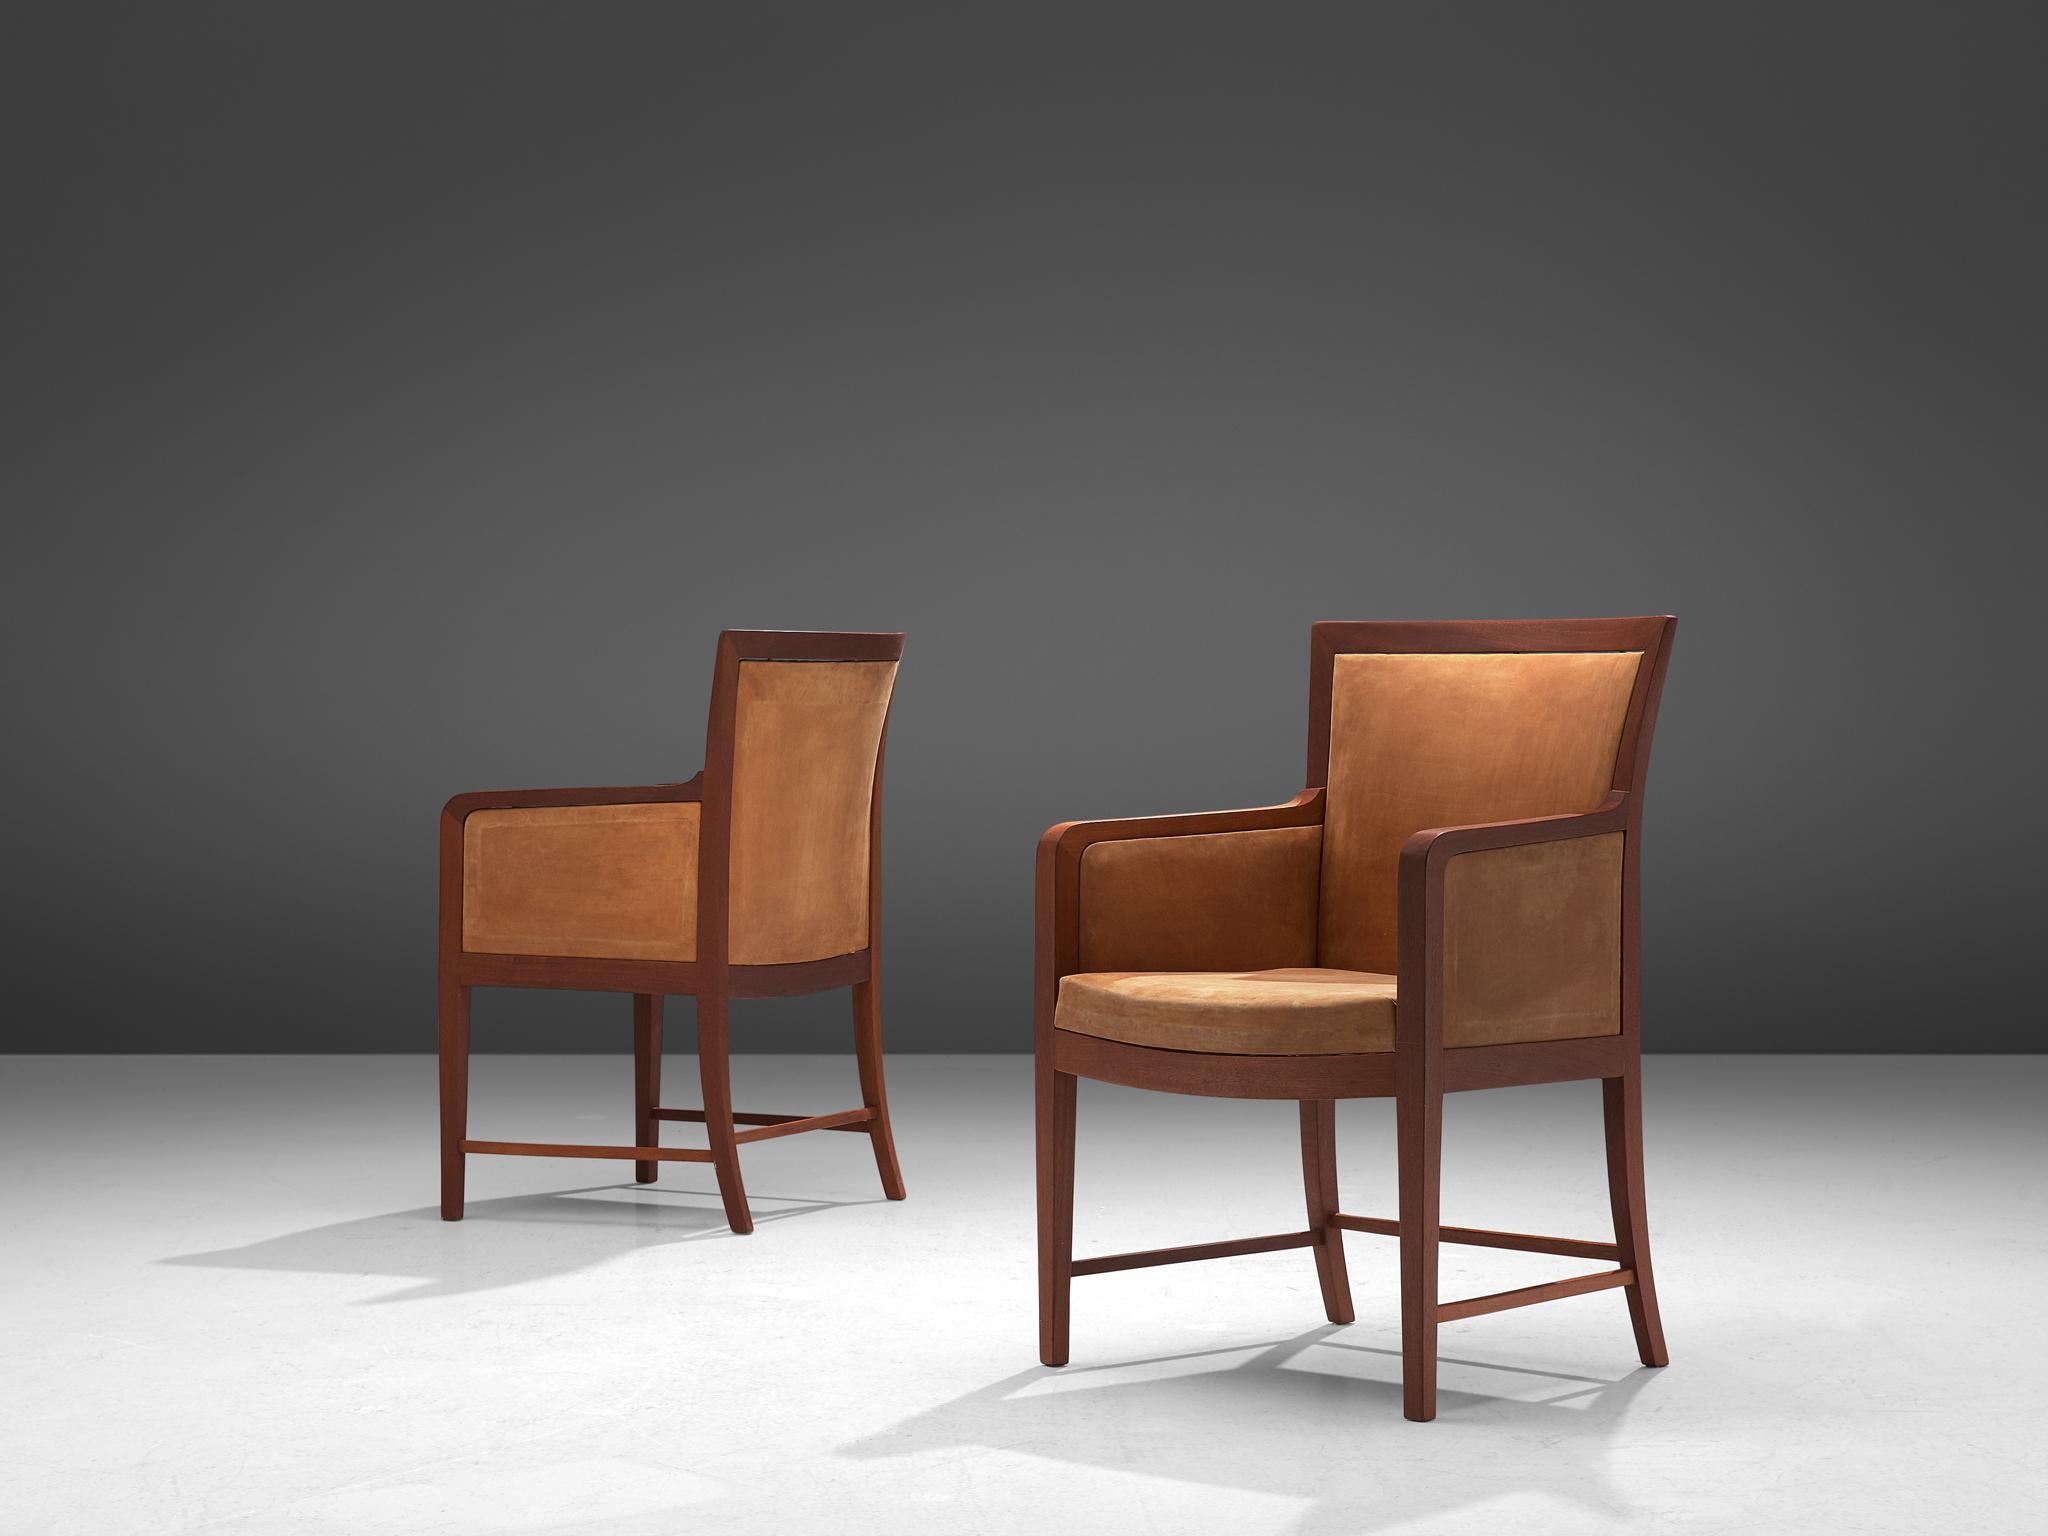 Kaj Gottlob for Rud Rasmussen, pair of lounge chairs, leather and mahogany, Denmark, 1930s

This elegant set of easy chairs are designed by Kaj Gottlob and crafted by Rud Rasmussen. Characterized by simplicity, the chairs are executed in the finest